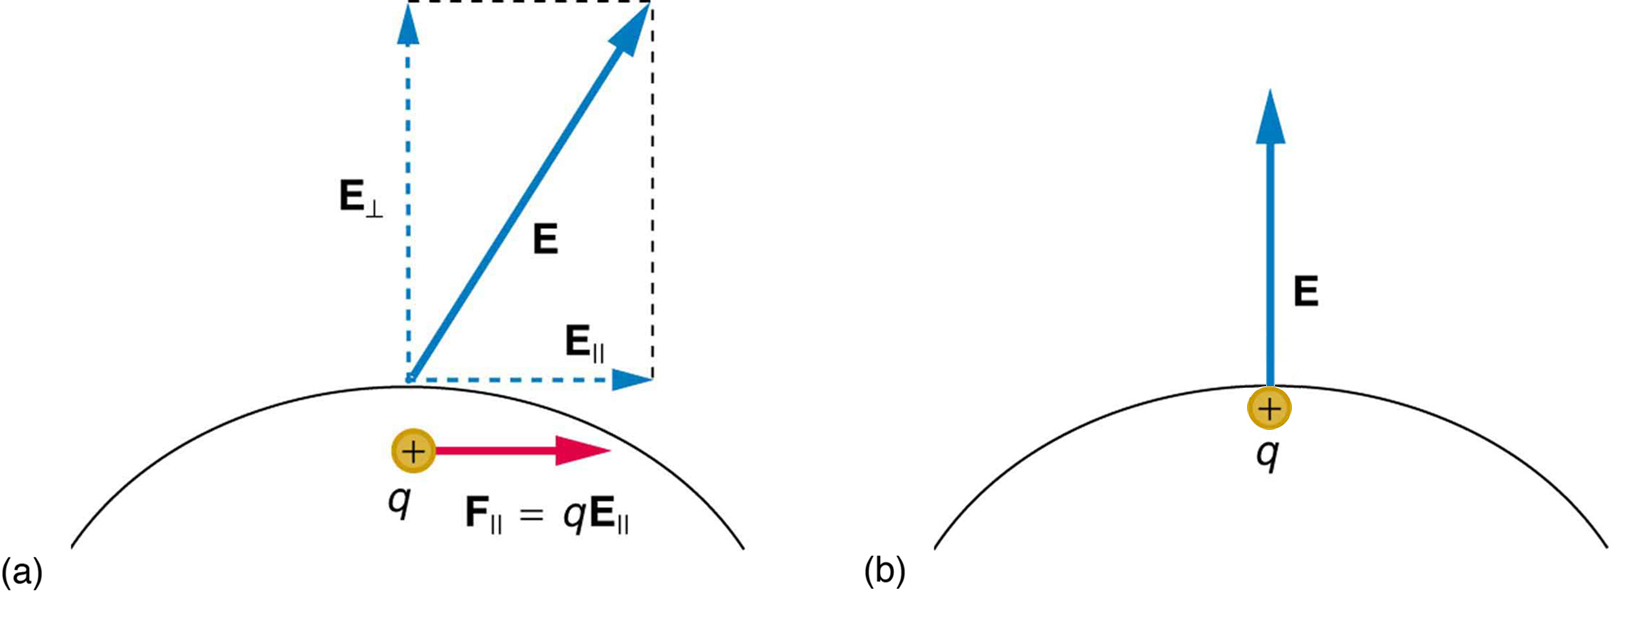 In part a, an electric field E exists at some angle with the horizontal applied on a conductor. One component of this field E parallel is along x axis represented by a vector arrow and other E perpendicular, is along y axis represented by a vector arrow. Charge inside the conductor moves along x axis so the force acting on it is F parallel, which is equal to q multiplied by E parallel. In part b, a charge is shown inside the conductor and electric field is represented by a vector arrow pointing upward starting from the surface of the conductor.